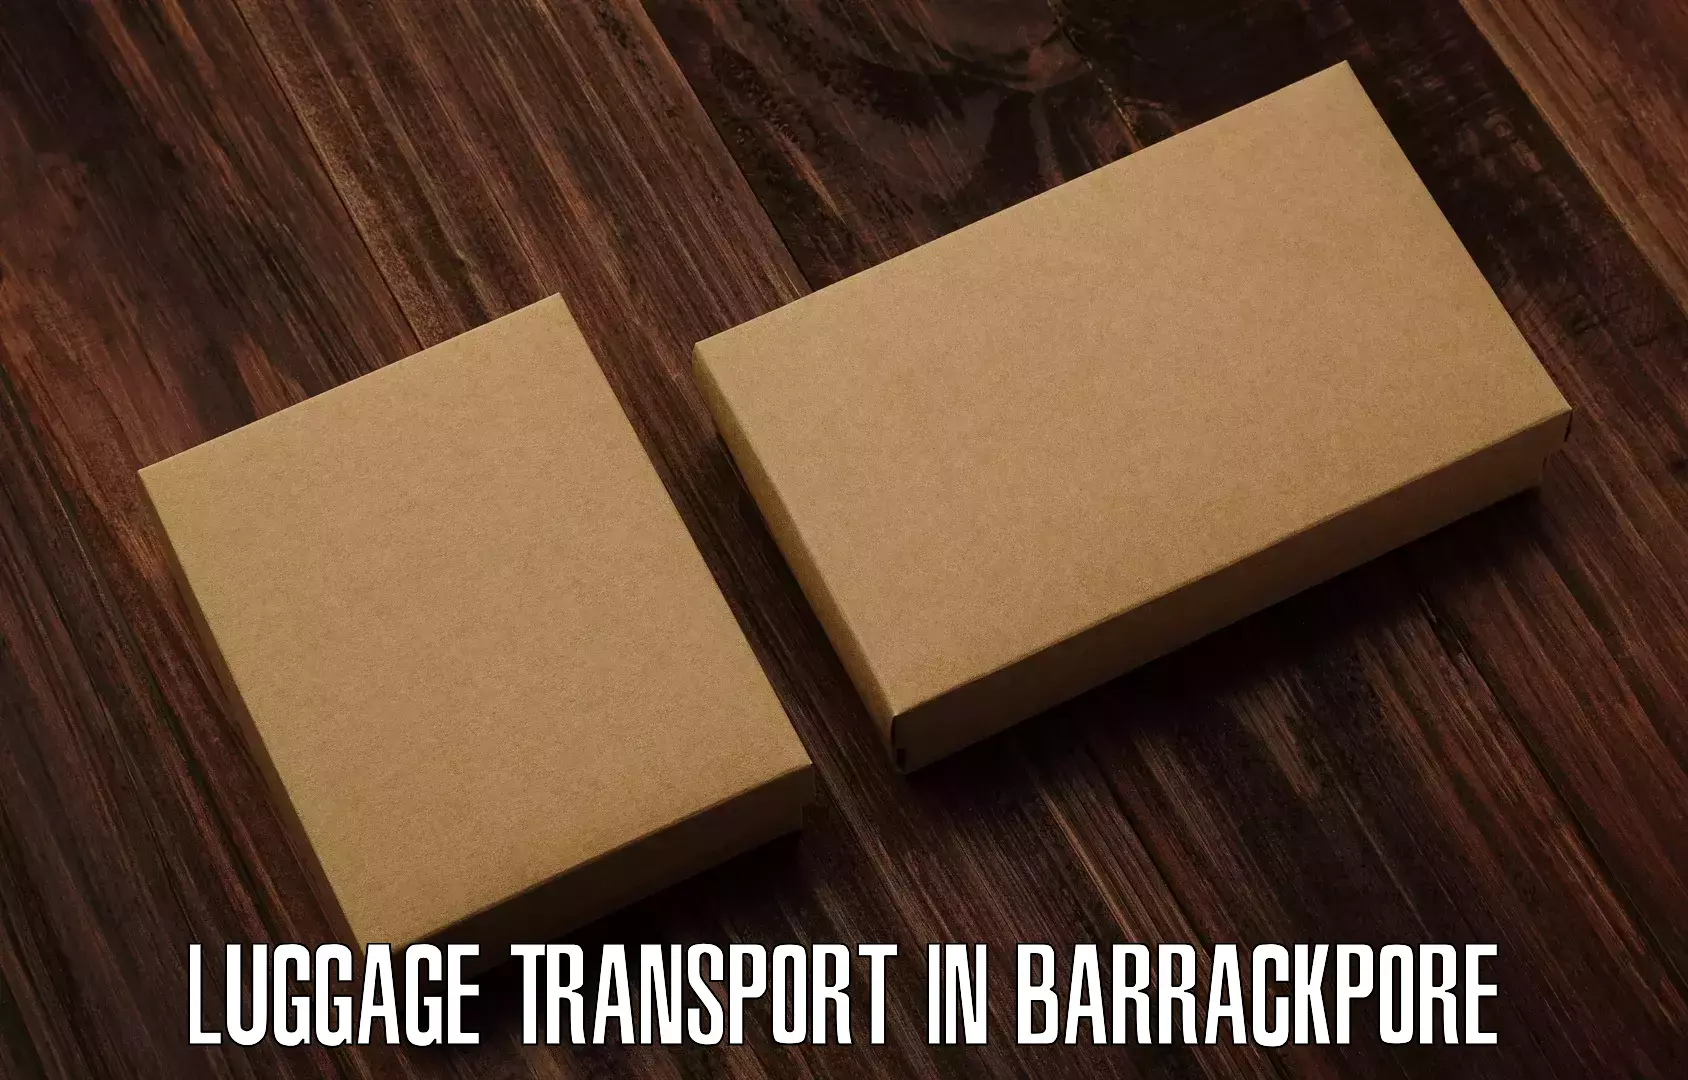 Luggage transport consulting in Barrackpore